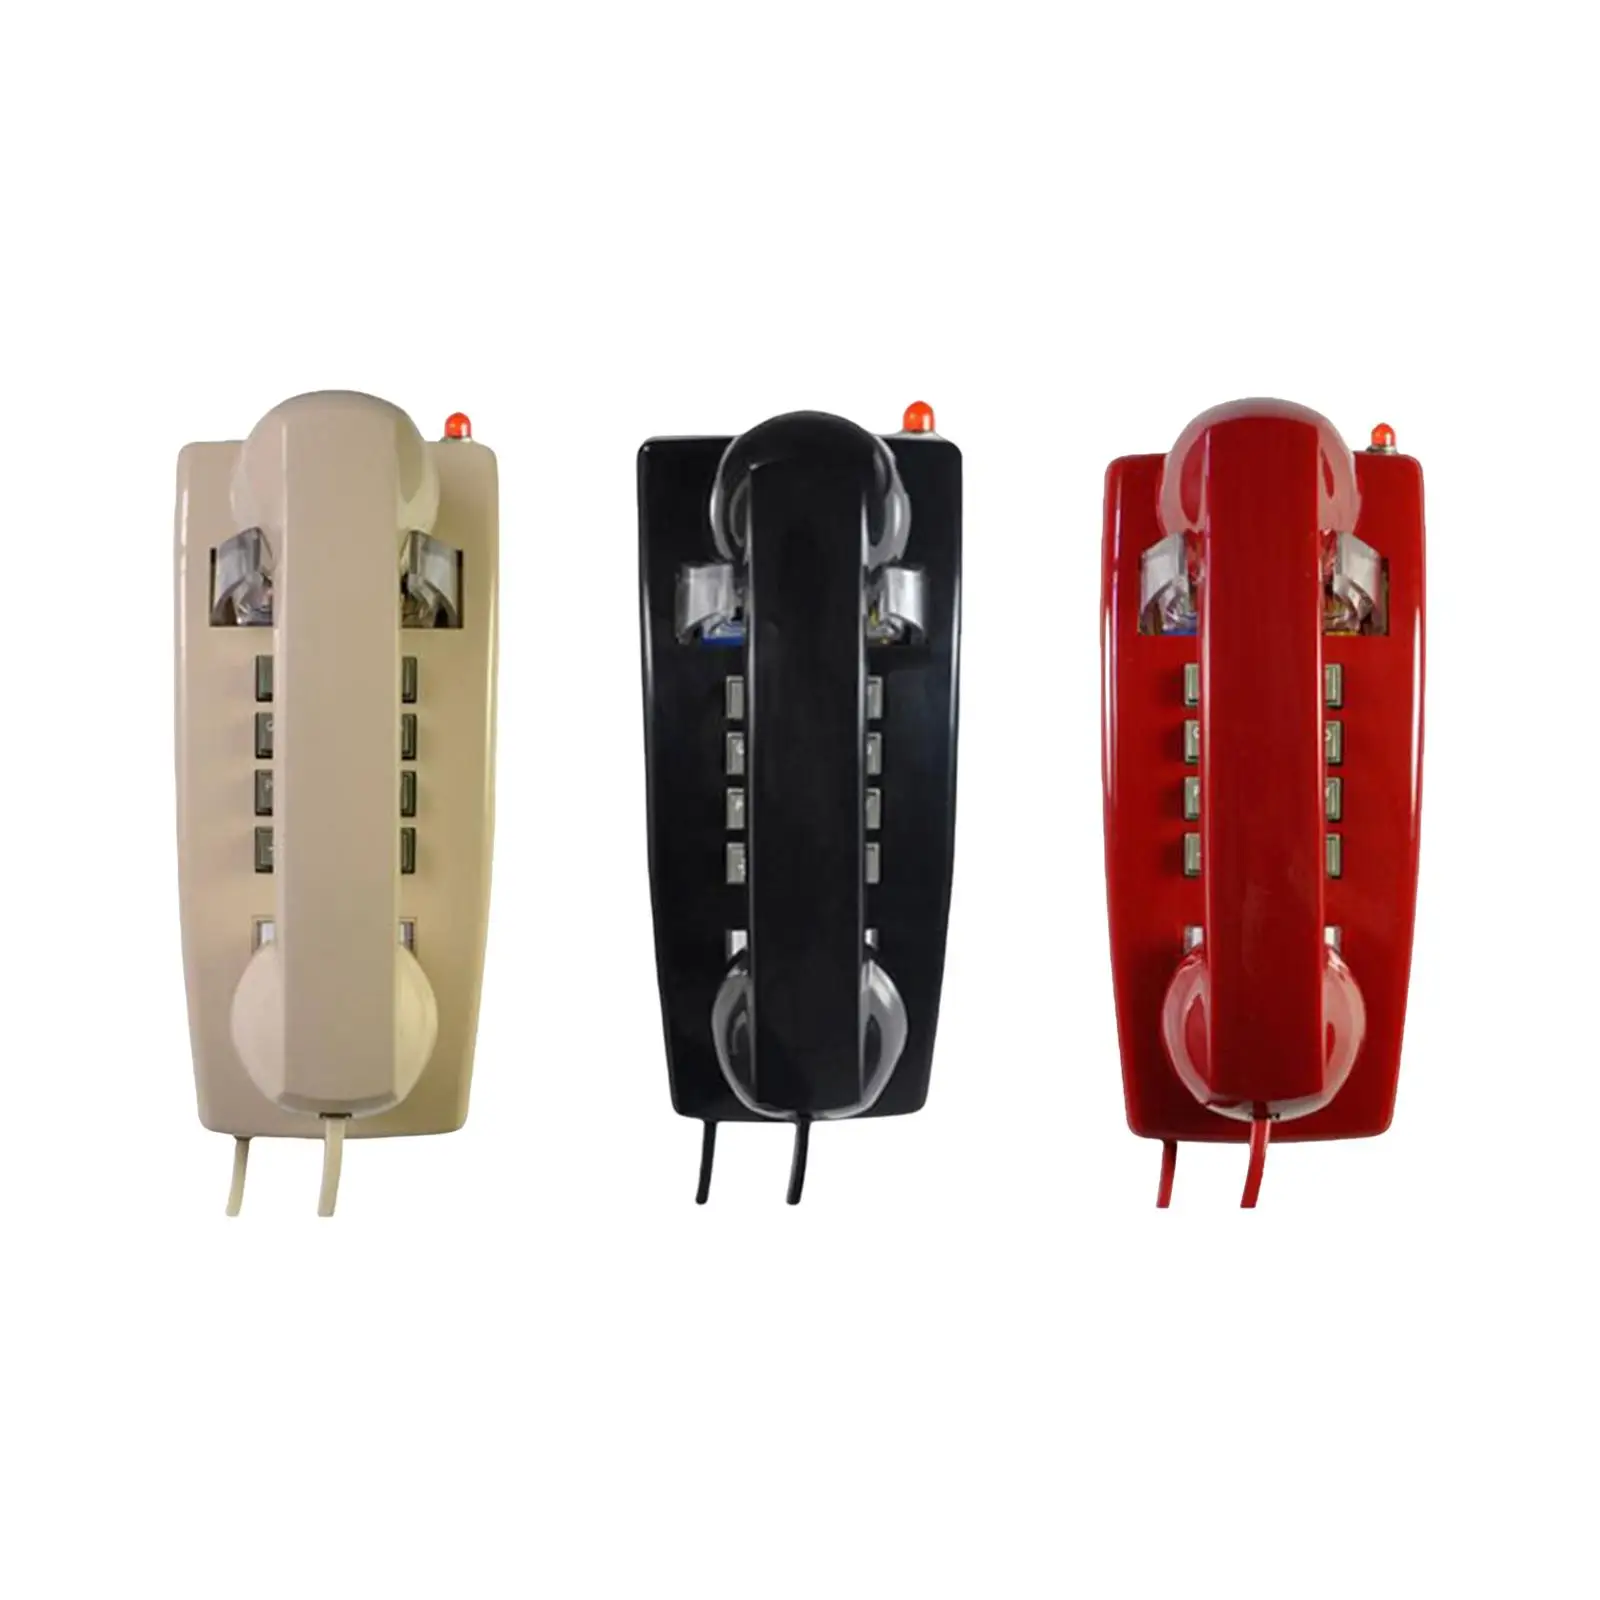 Retro Wall Telephone Wall Mount Phone with Cord with Indicator with Mechanical Ringing Wall Phone Landline for Garage Hotel Home